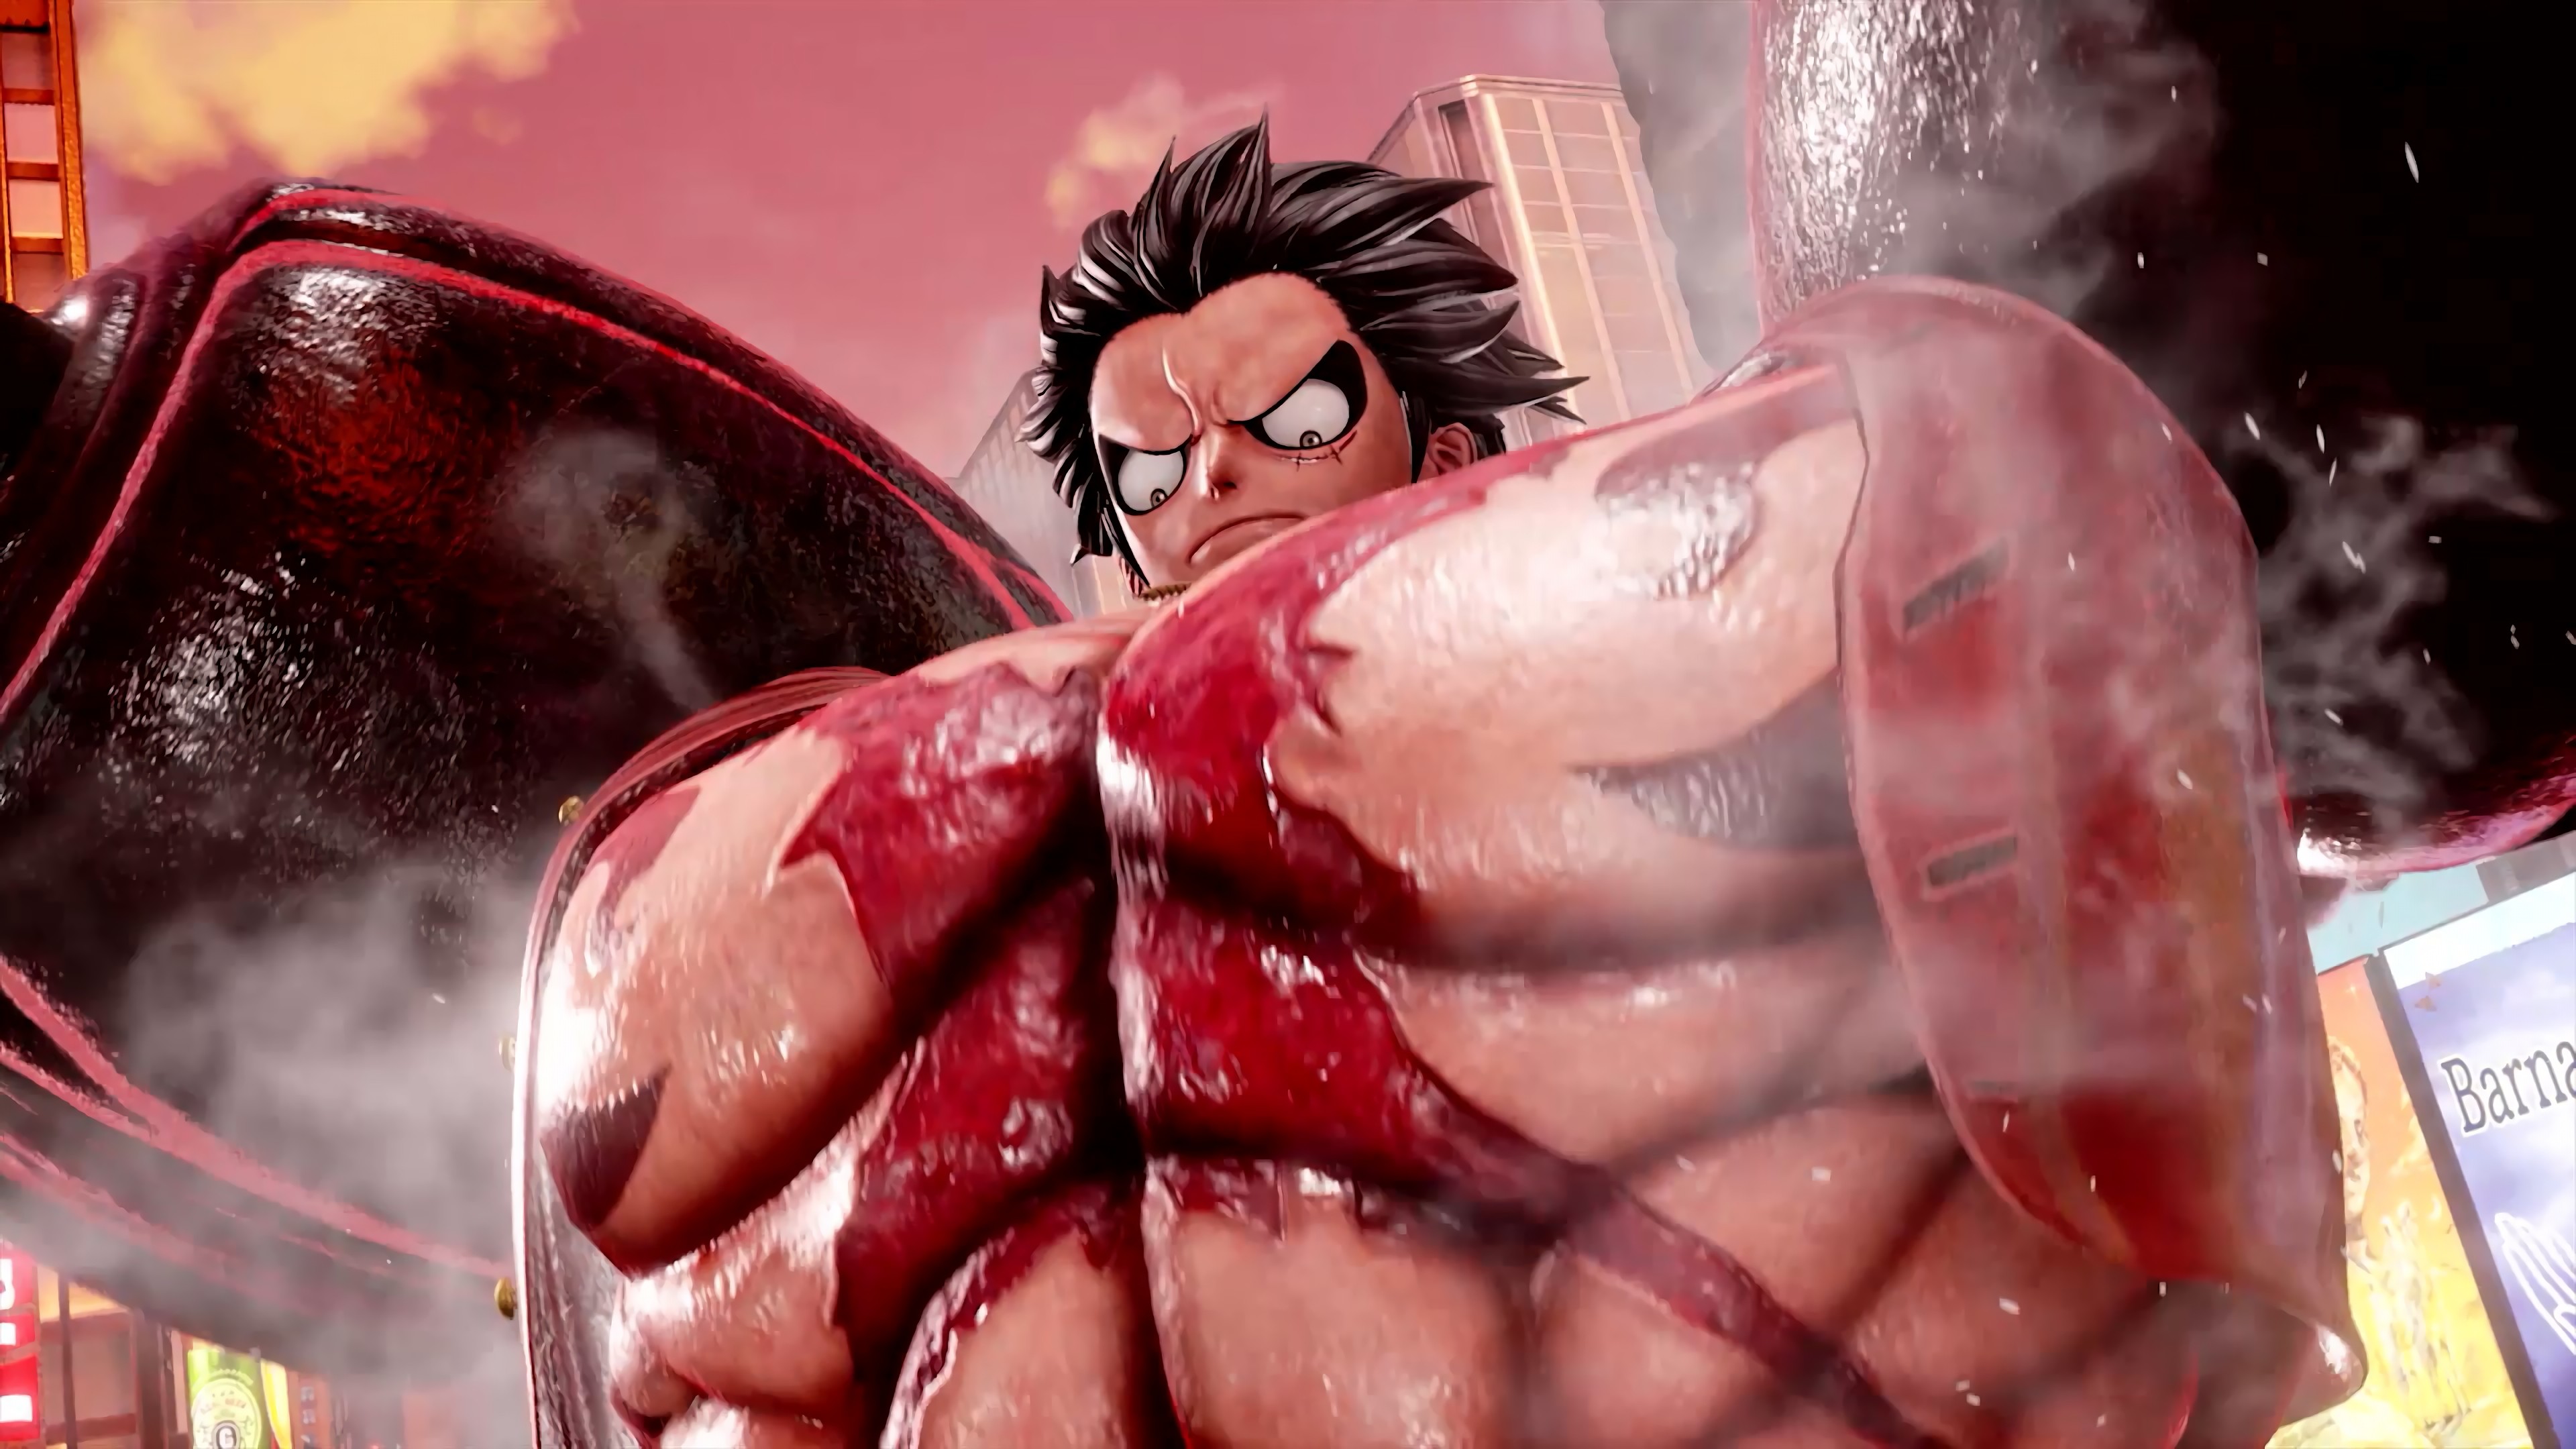 Luffy Gear 4 Wallpapers ·① Wallpapertag